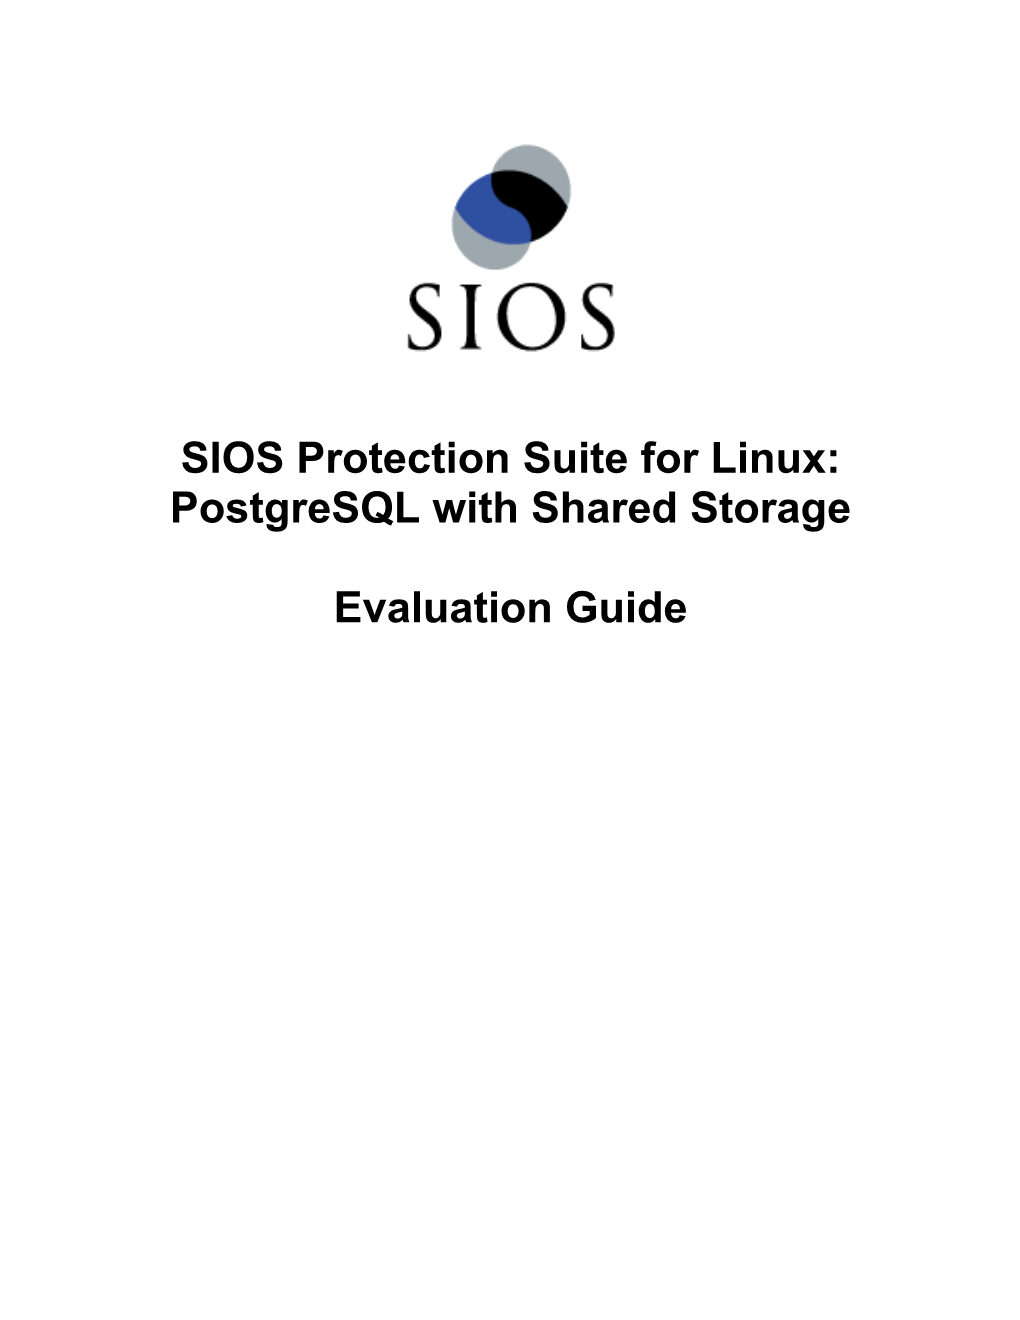 SIOS Protection Suite for Linux: Postgresql with Shared Storage